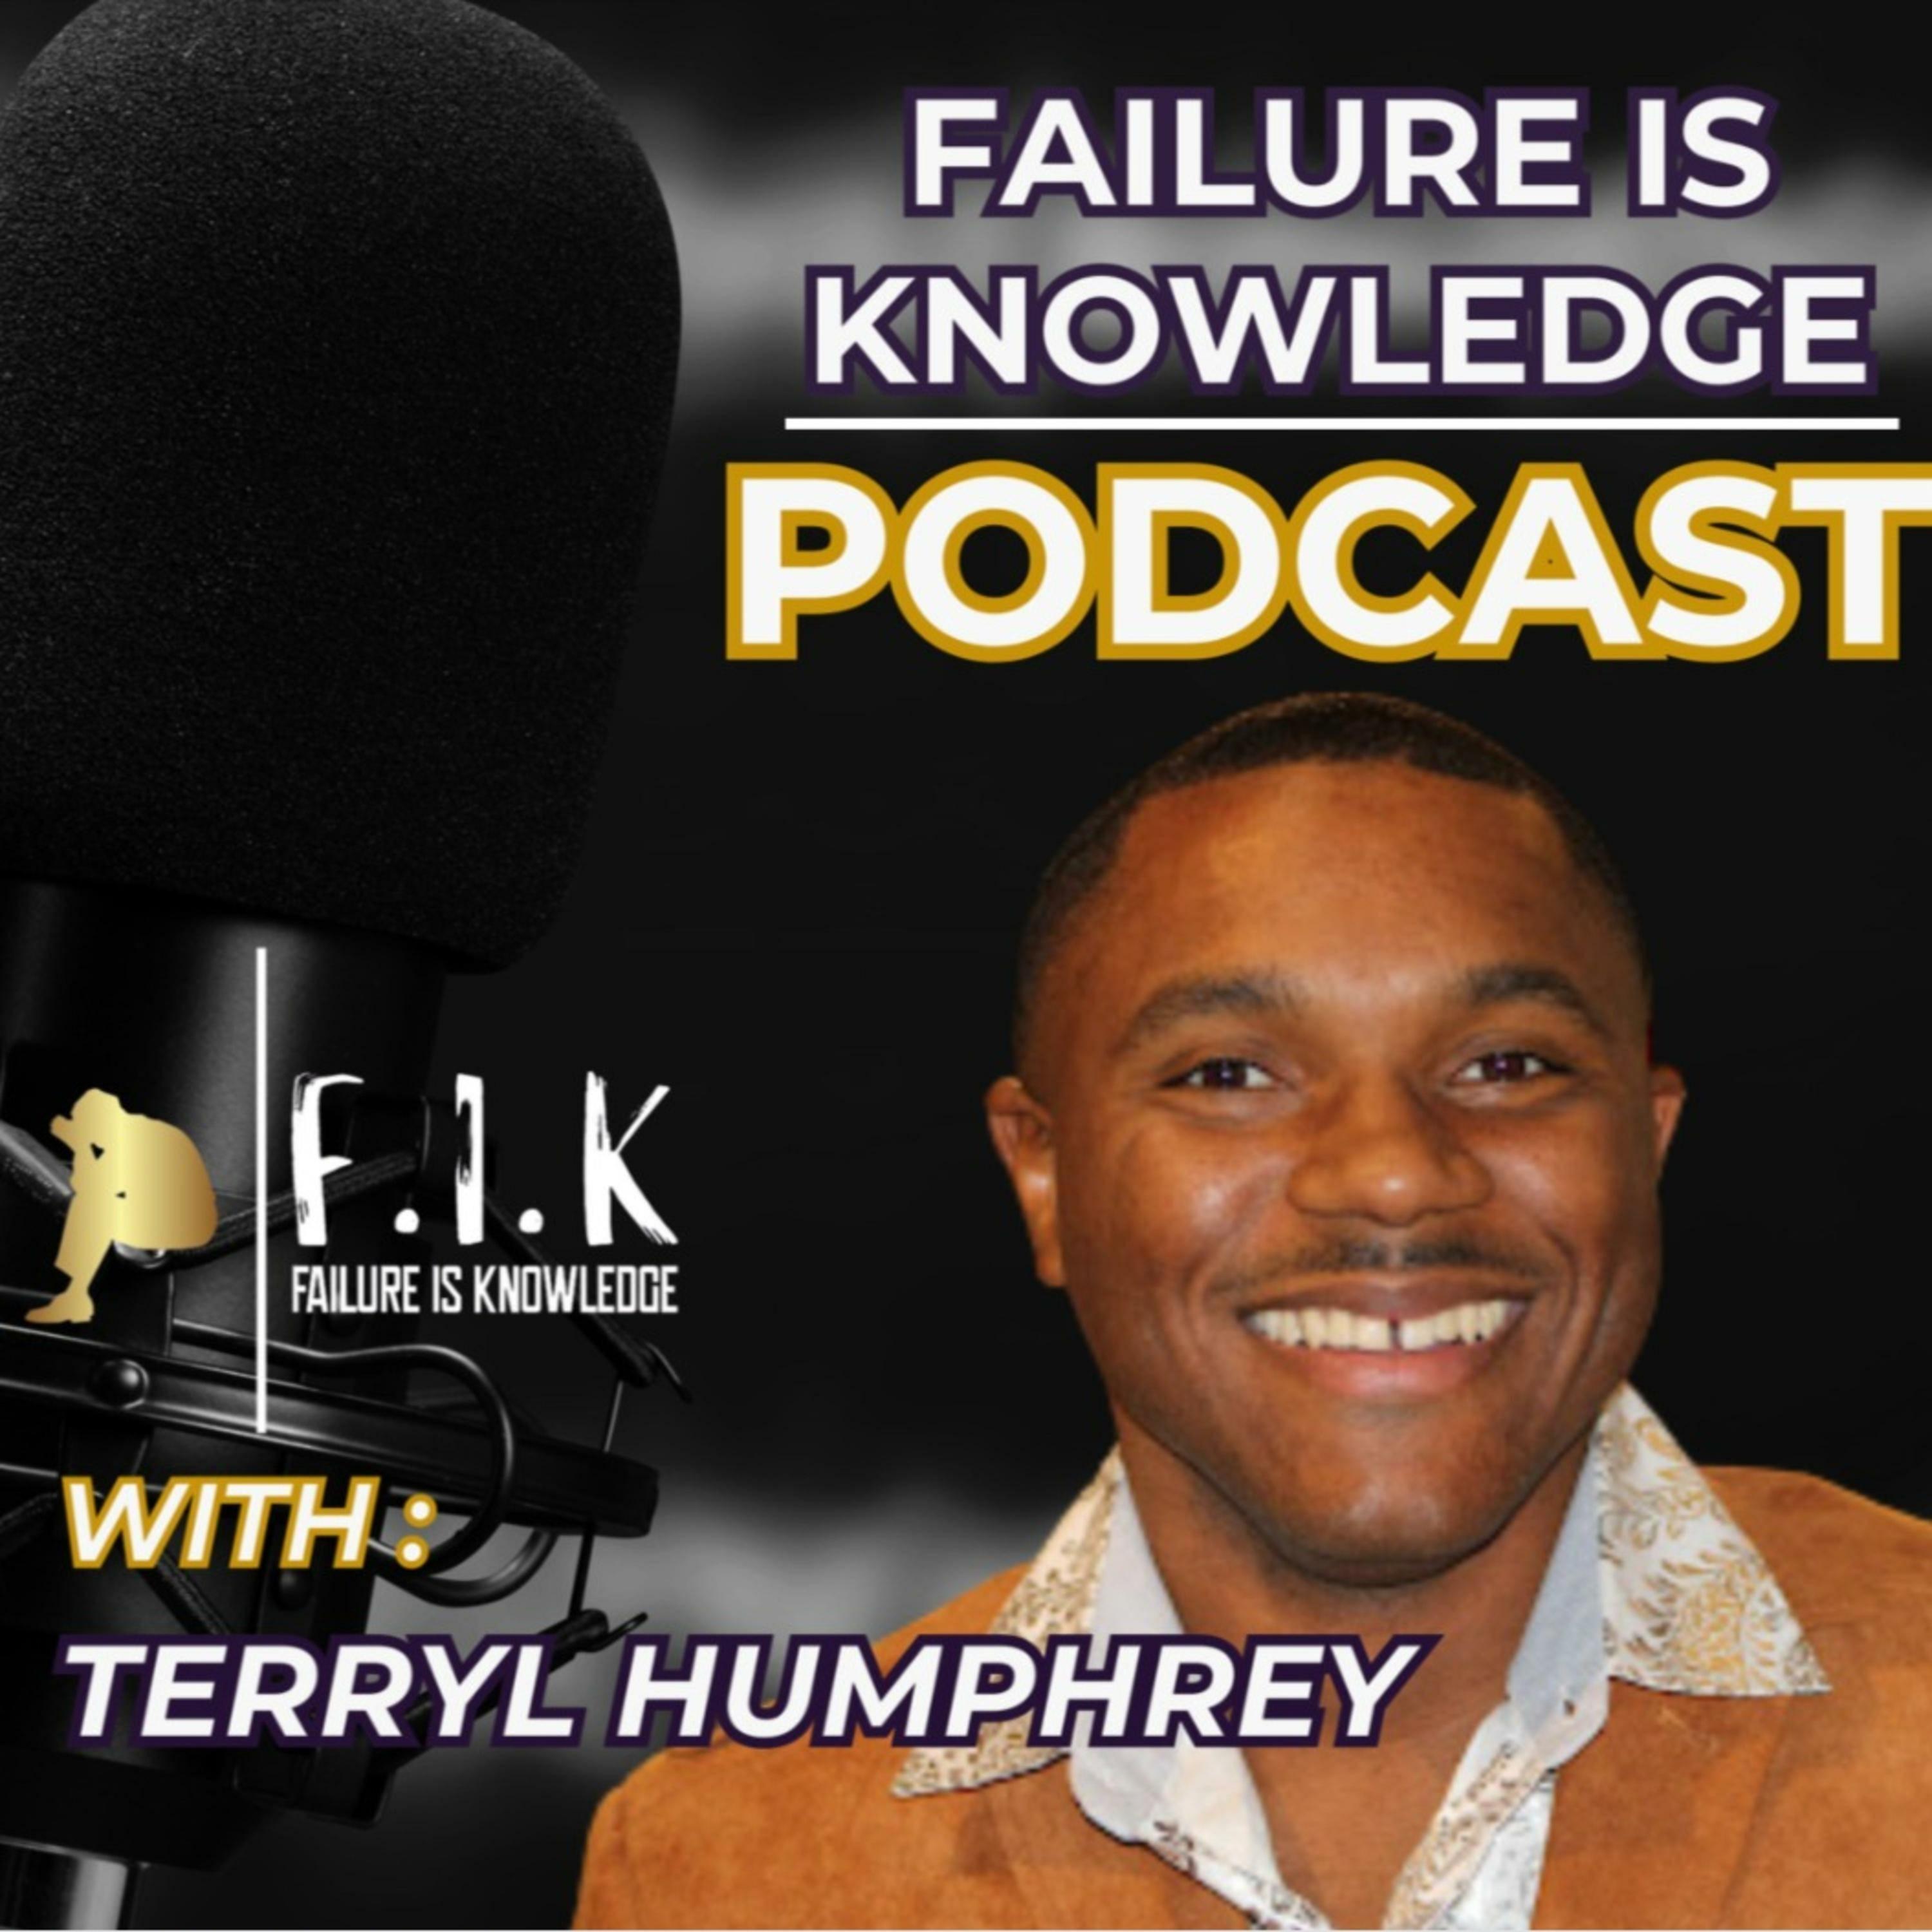 Terryl Humphrey Host of "Failure is Knowledge" Podcast